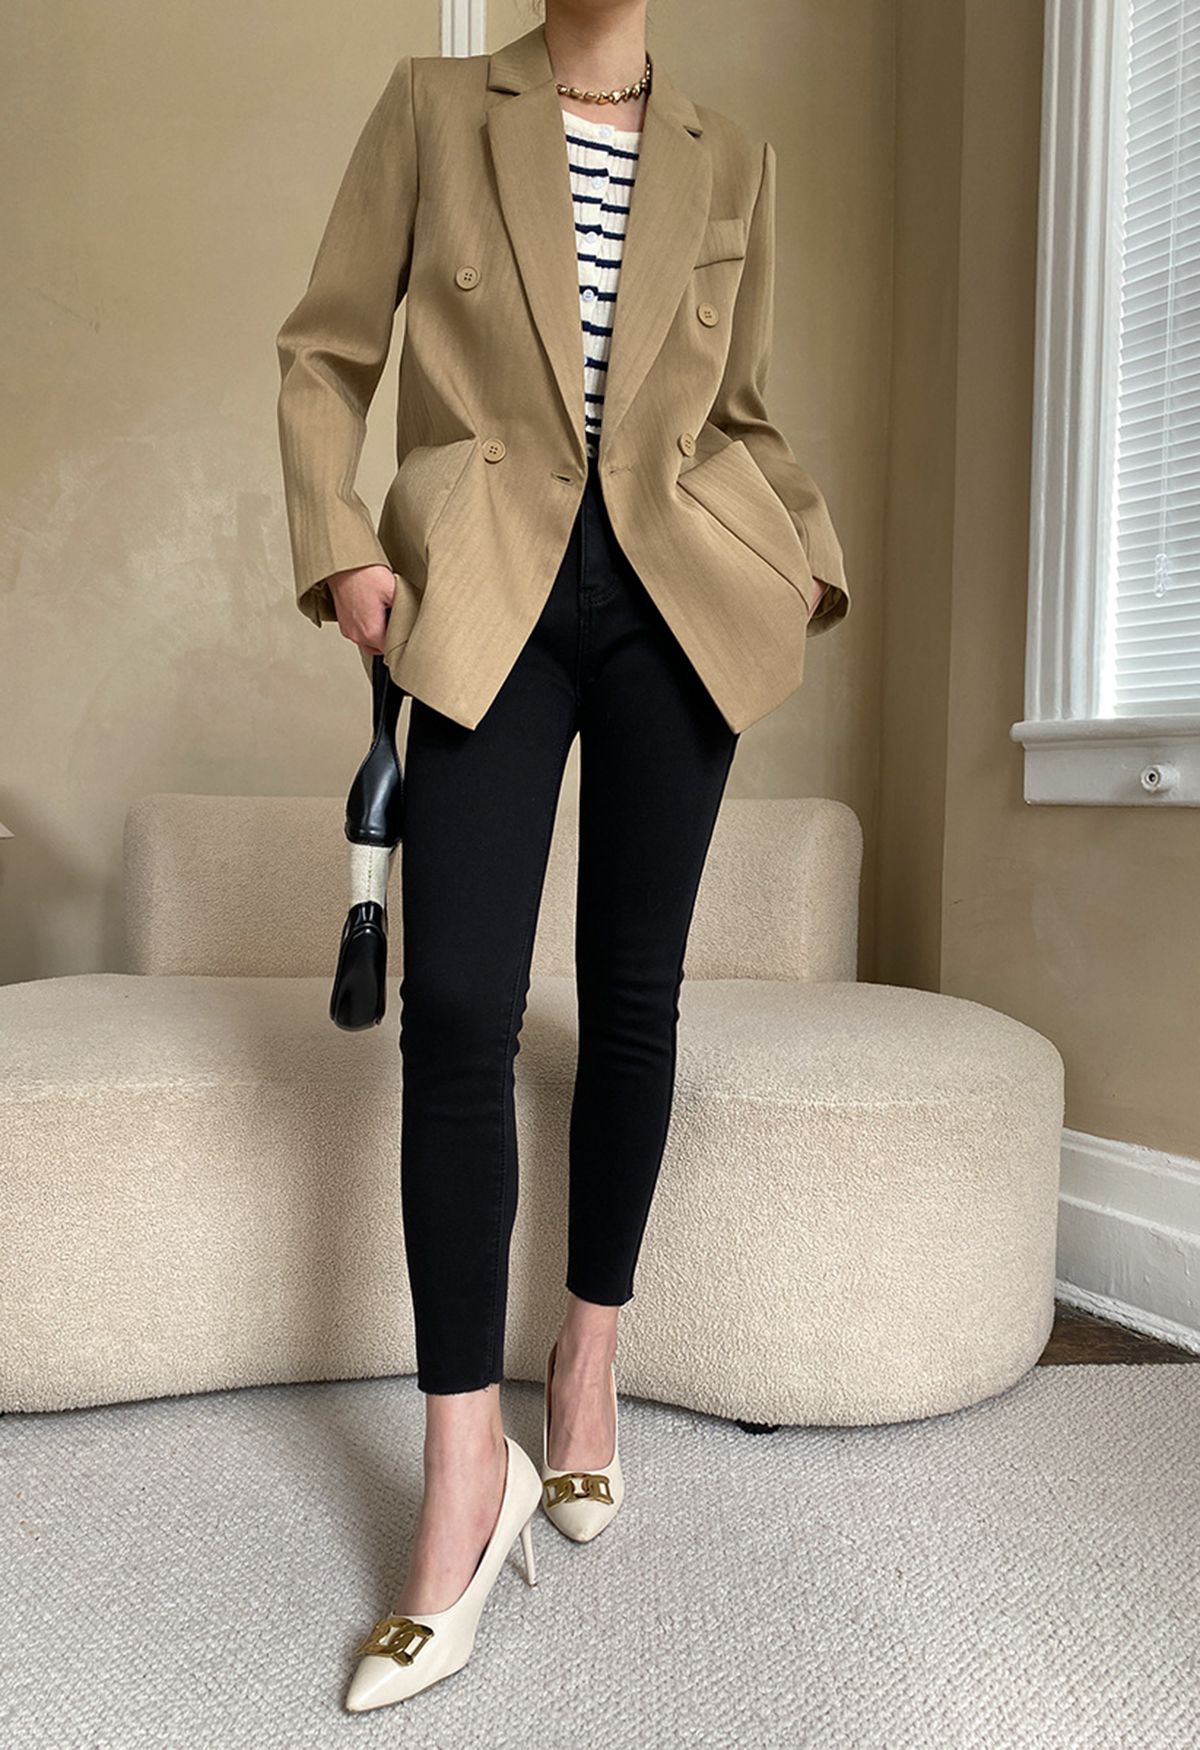 Solid Color Textured Double-Breasted Blazer in Tan